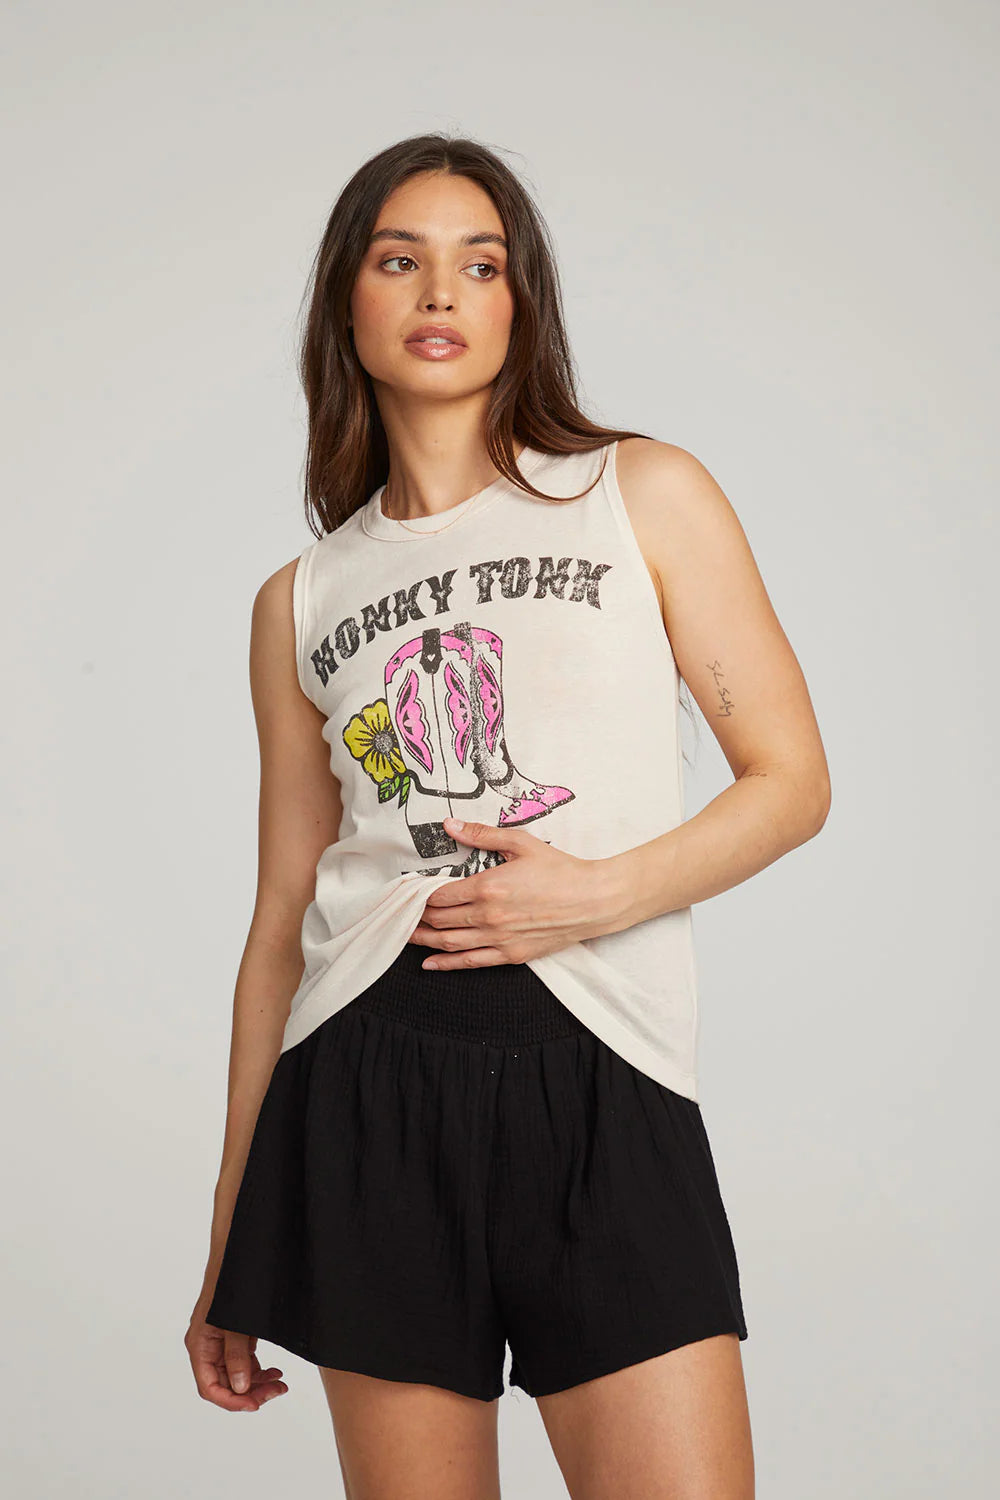 Honky Tonk Honey Muscle Tee - Pink Champagne